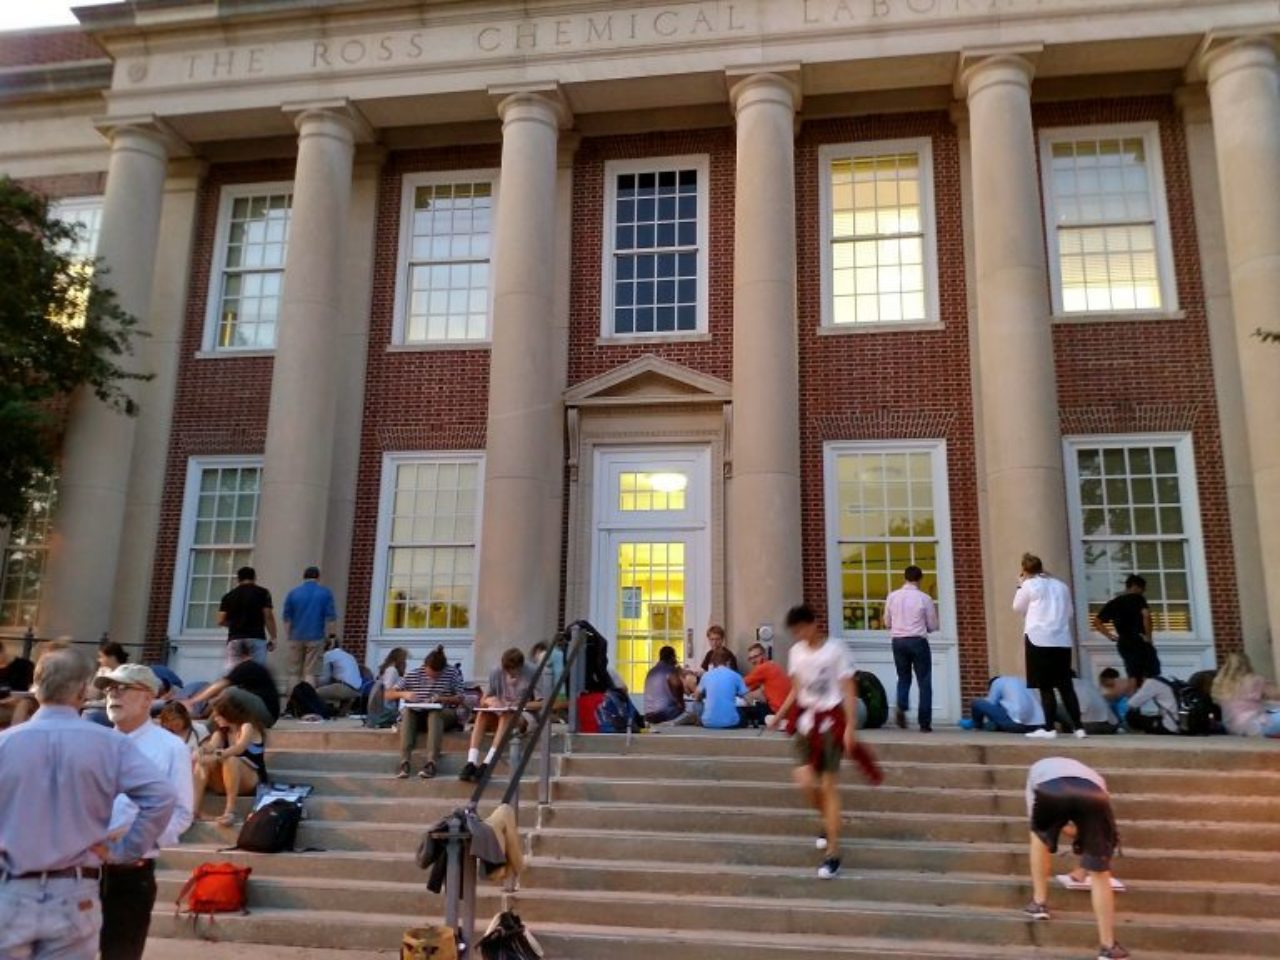 Students drawing architectural details of Ross Hall